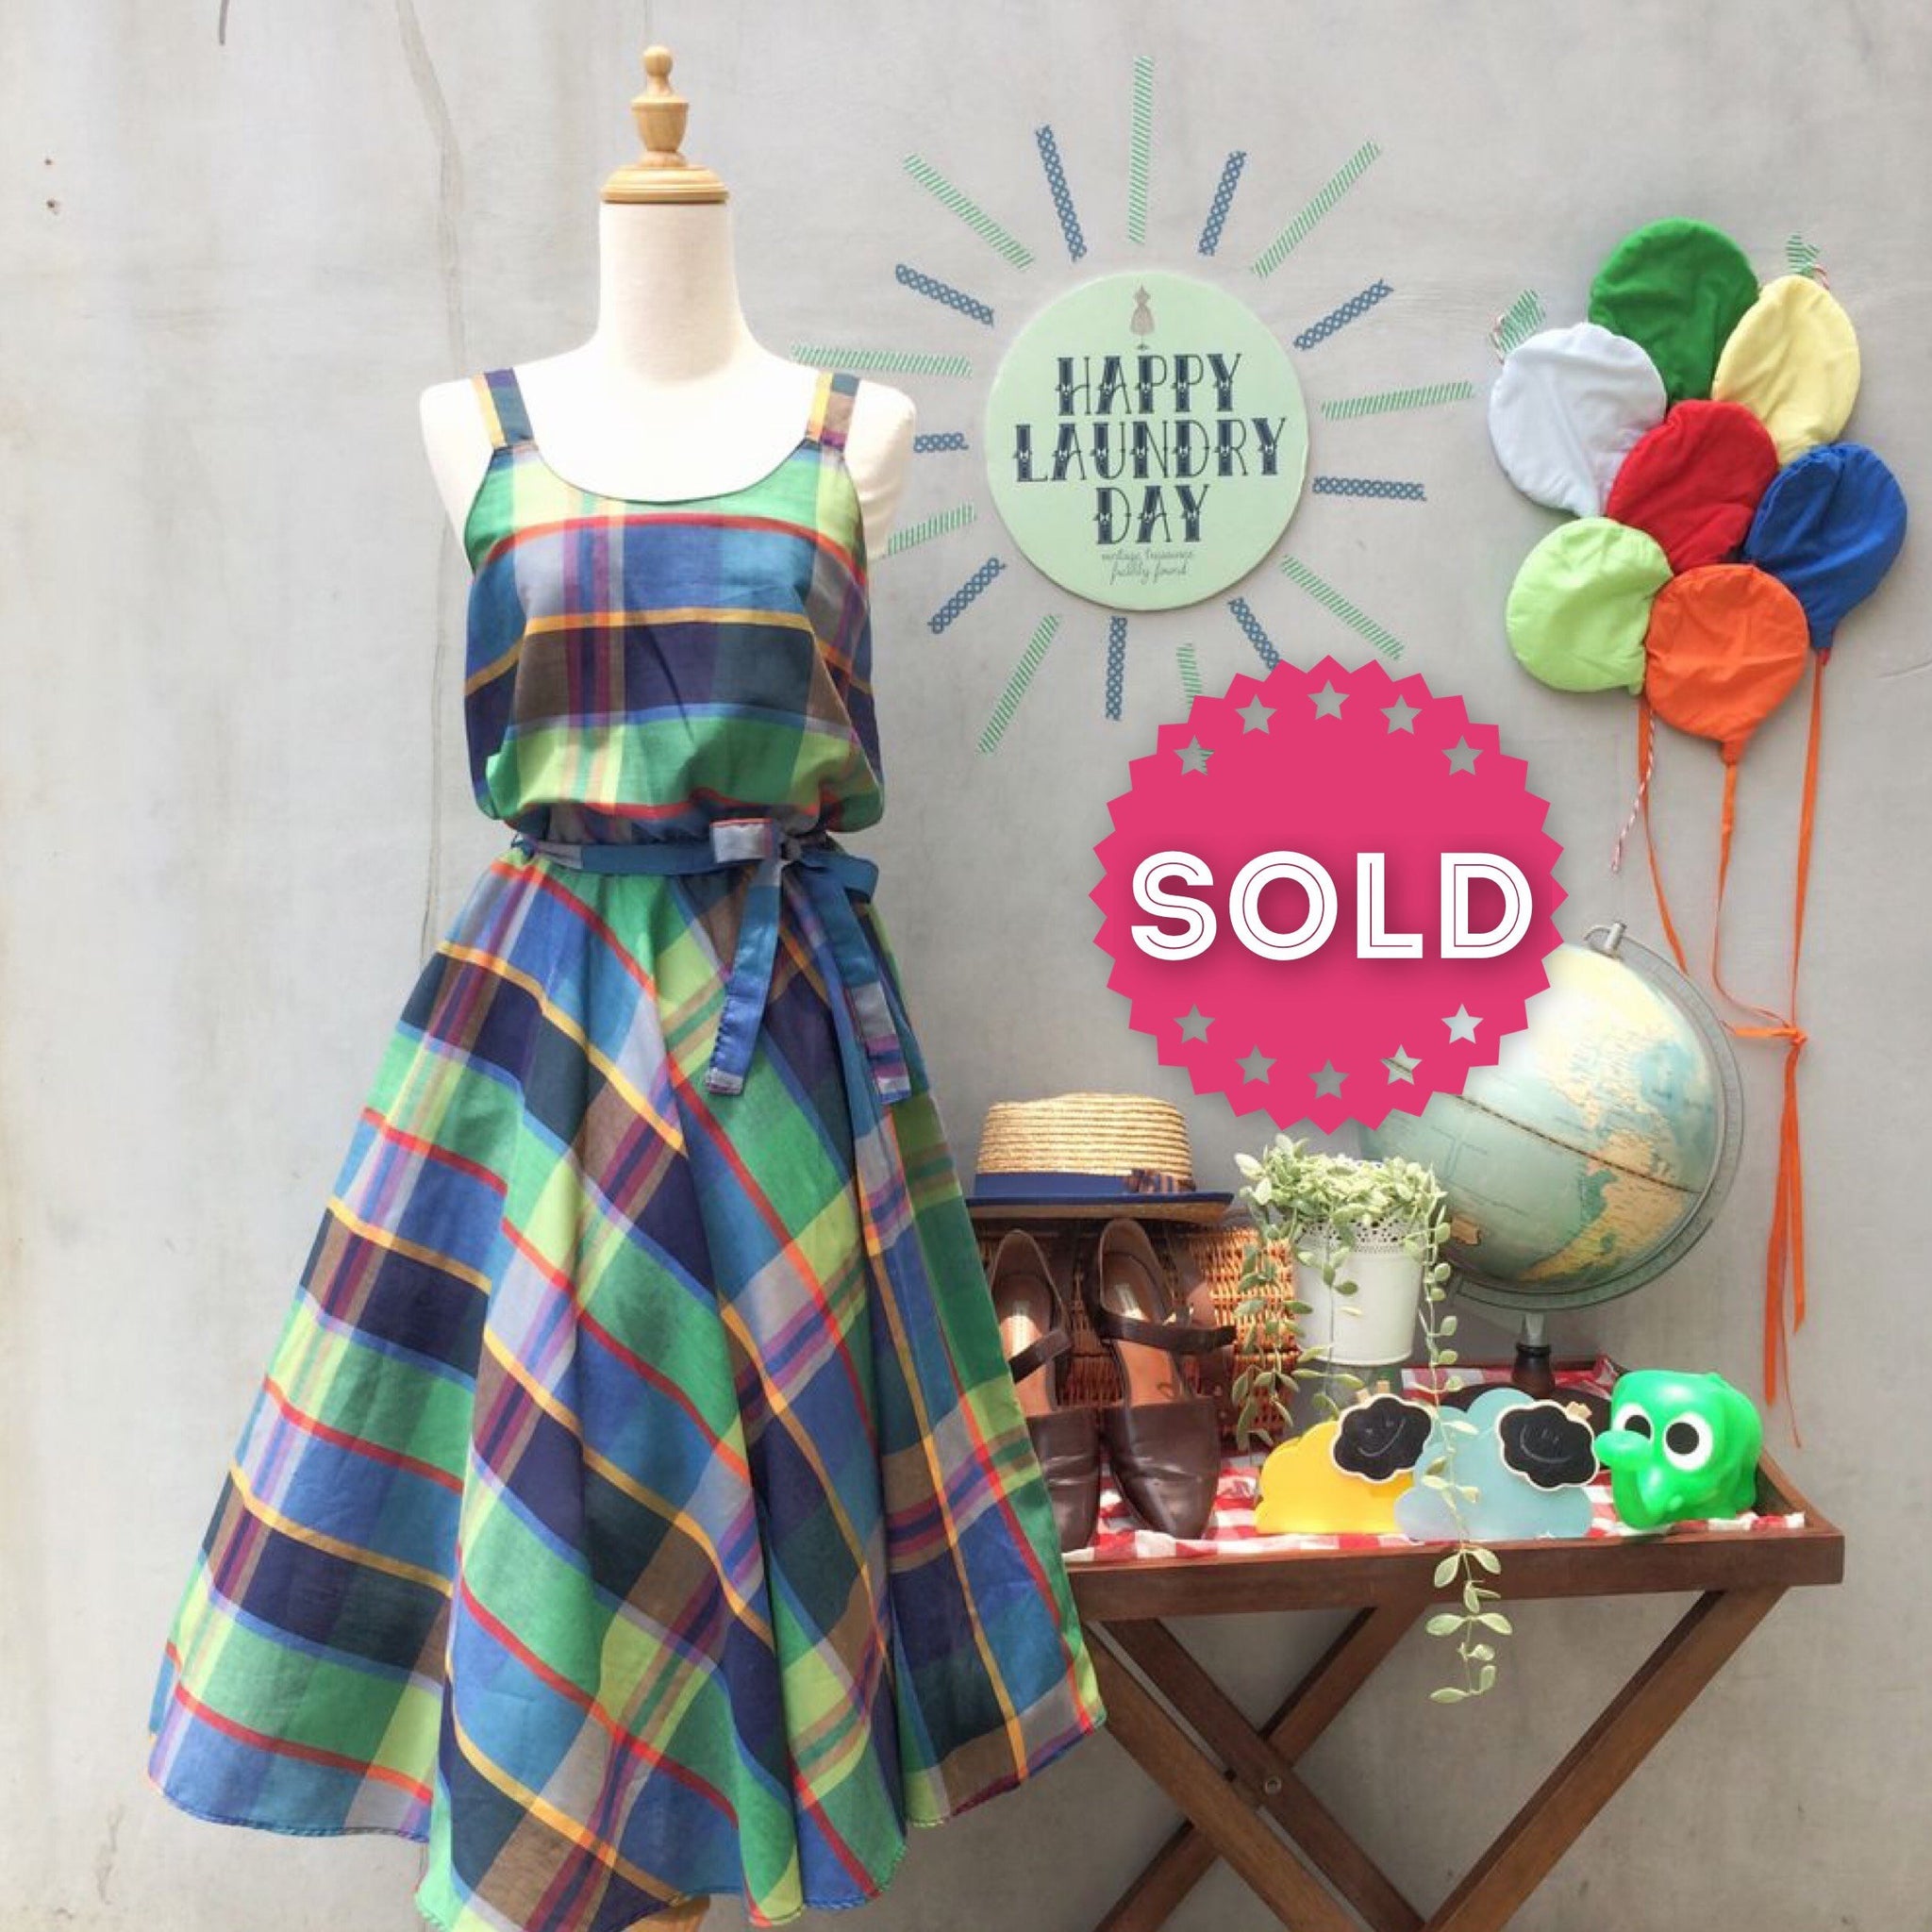 Bethany | Vintage 1950s 1960s Diagonal squares and checks Bold Green Blue strappy Sundress